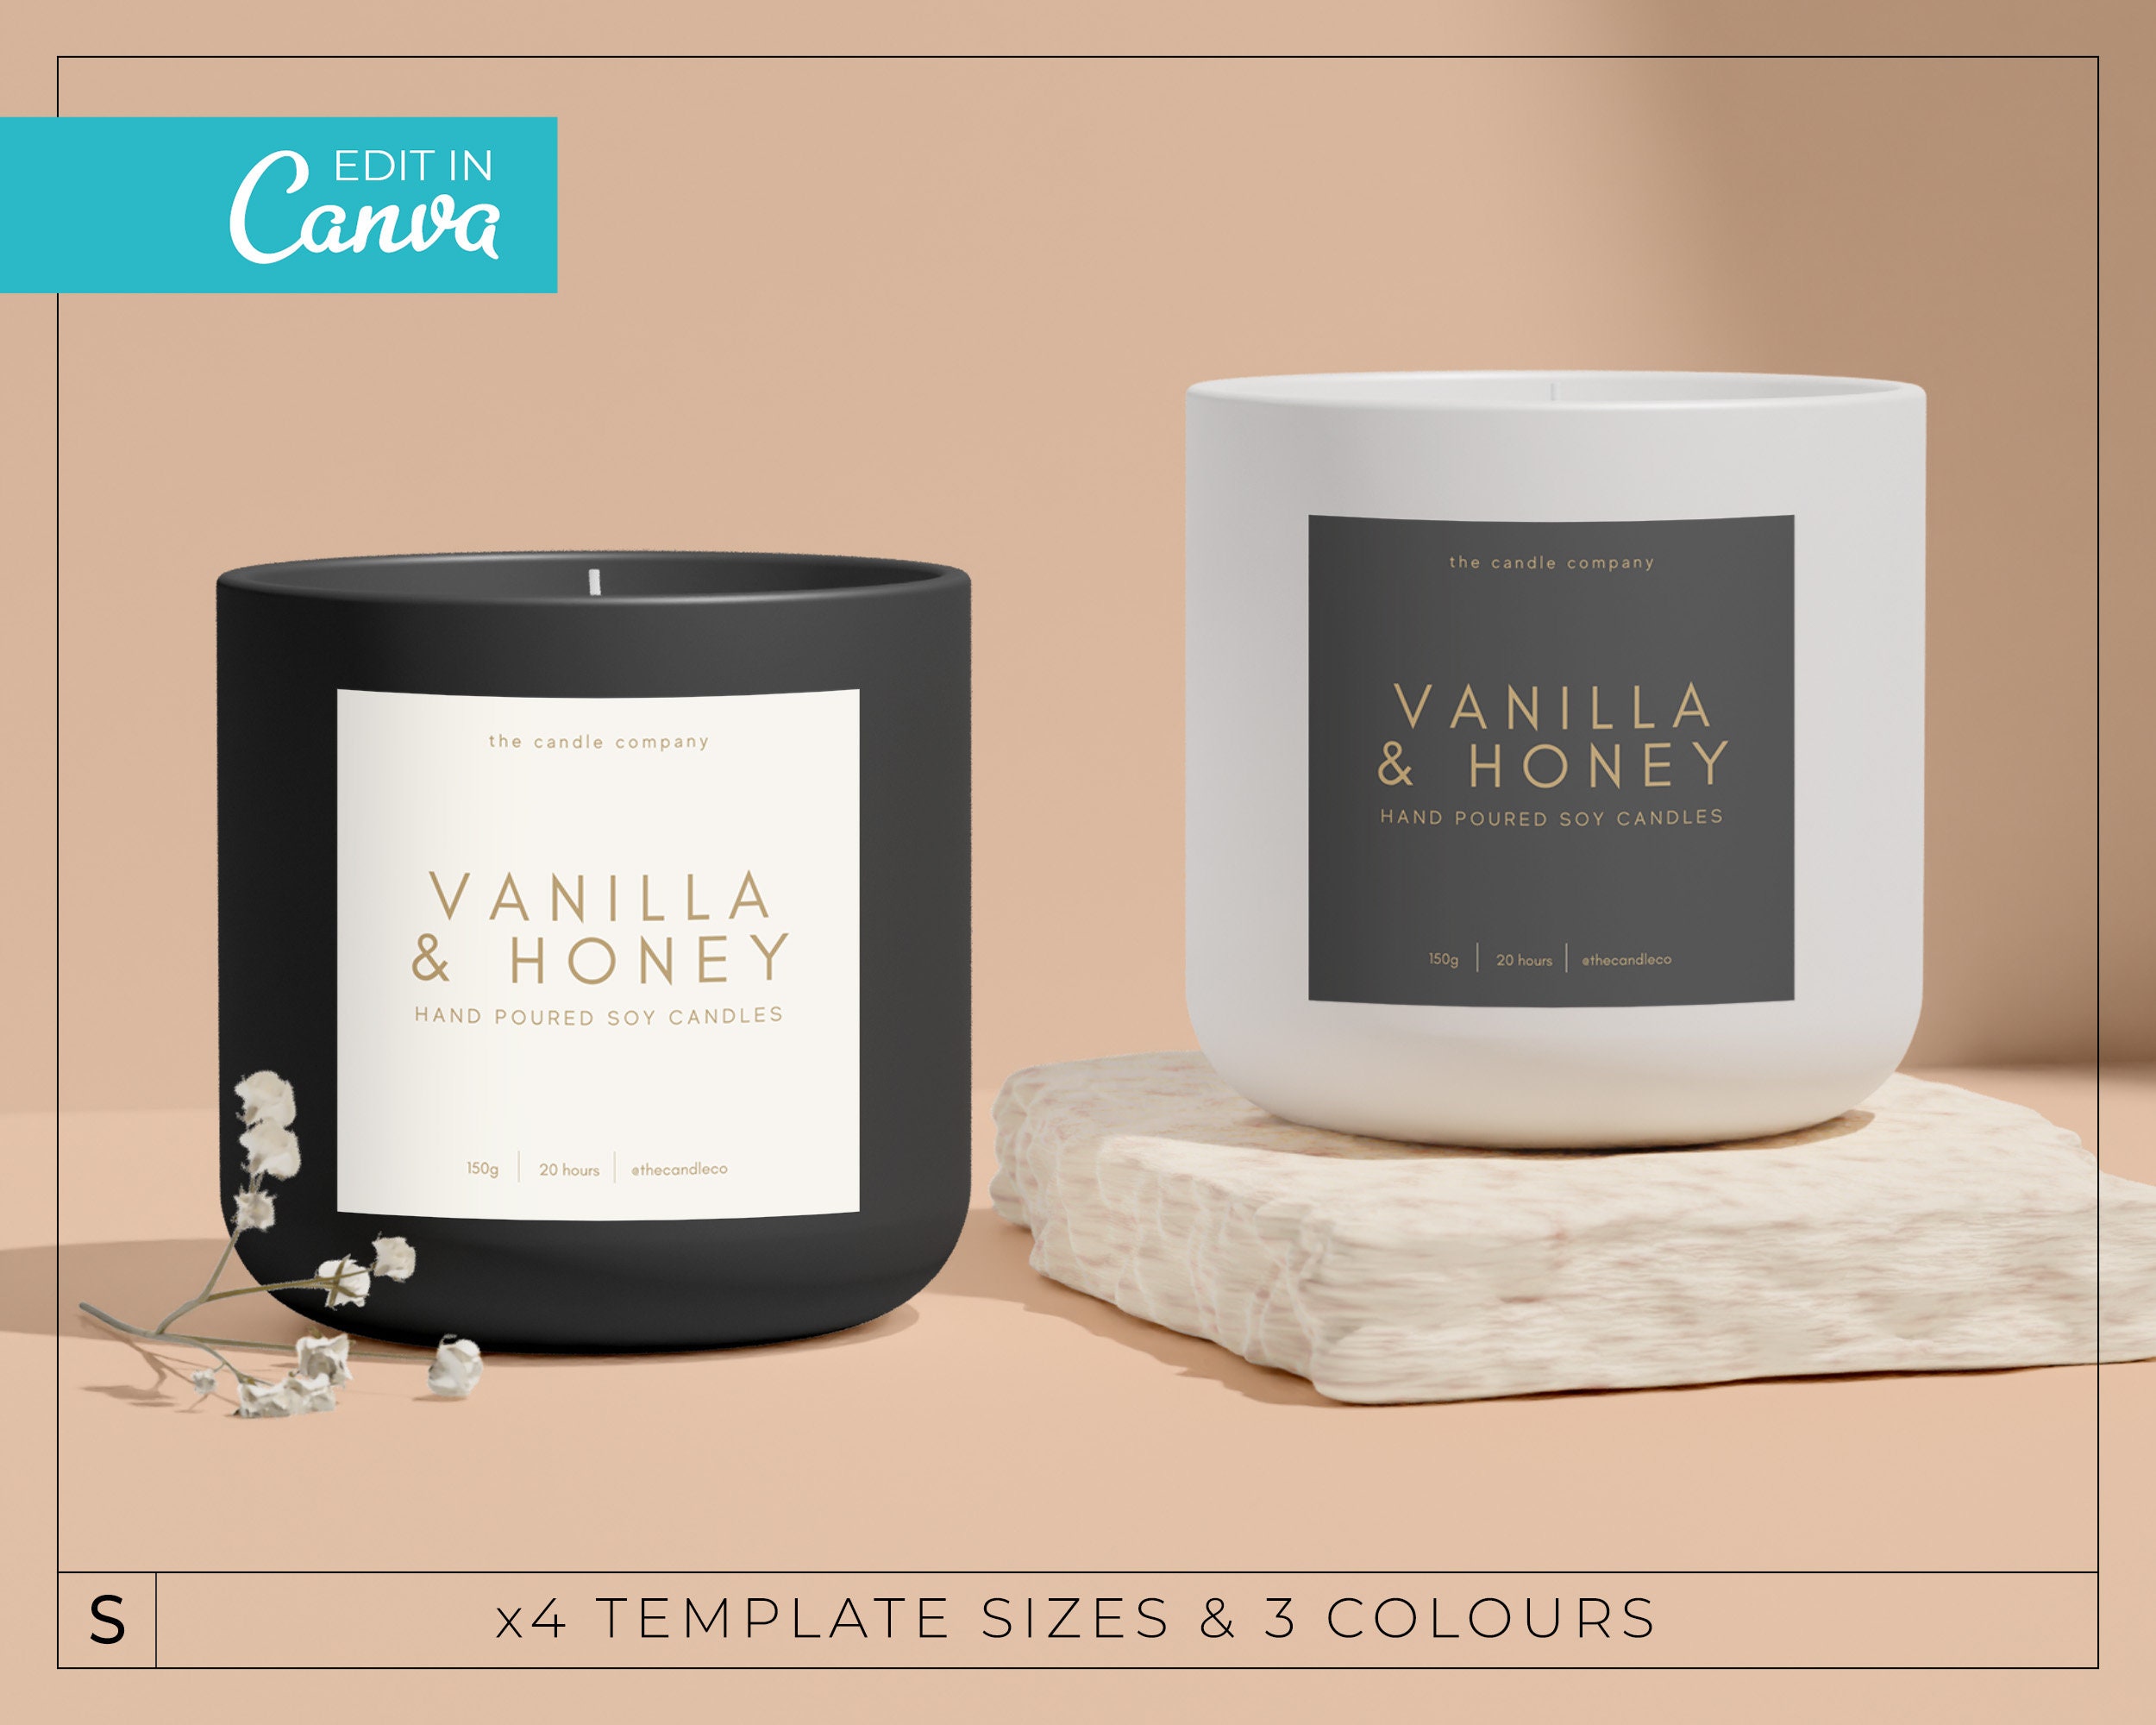 Candle Labels Template, Printable Boho Candle Label Template, DIY Candle  Jar Labels, Square and Rectangle Candle Labels Template 029 